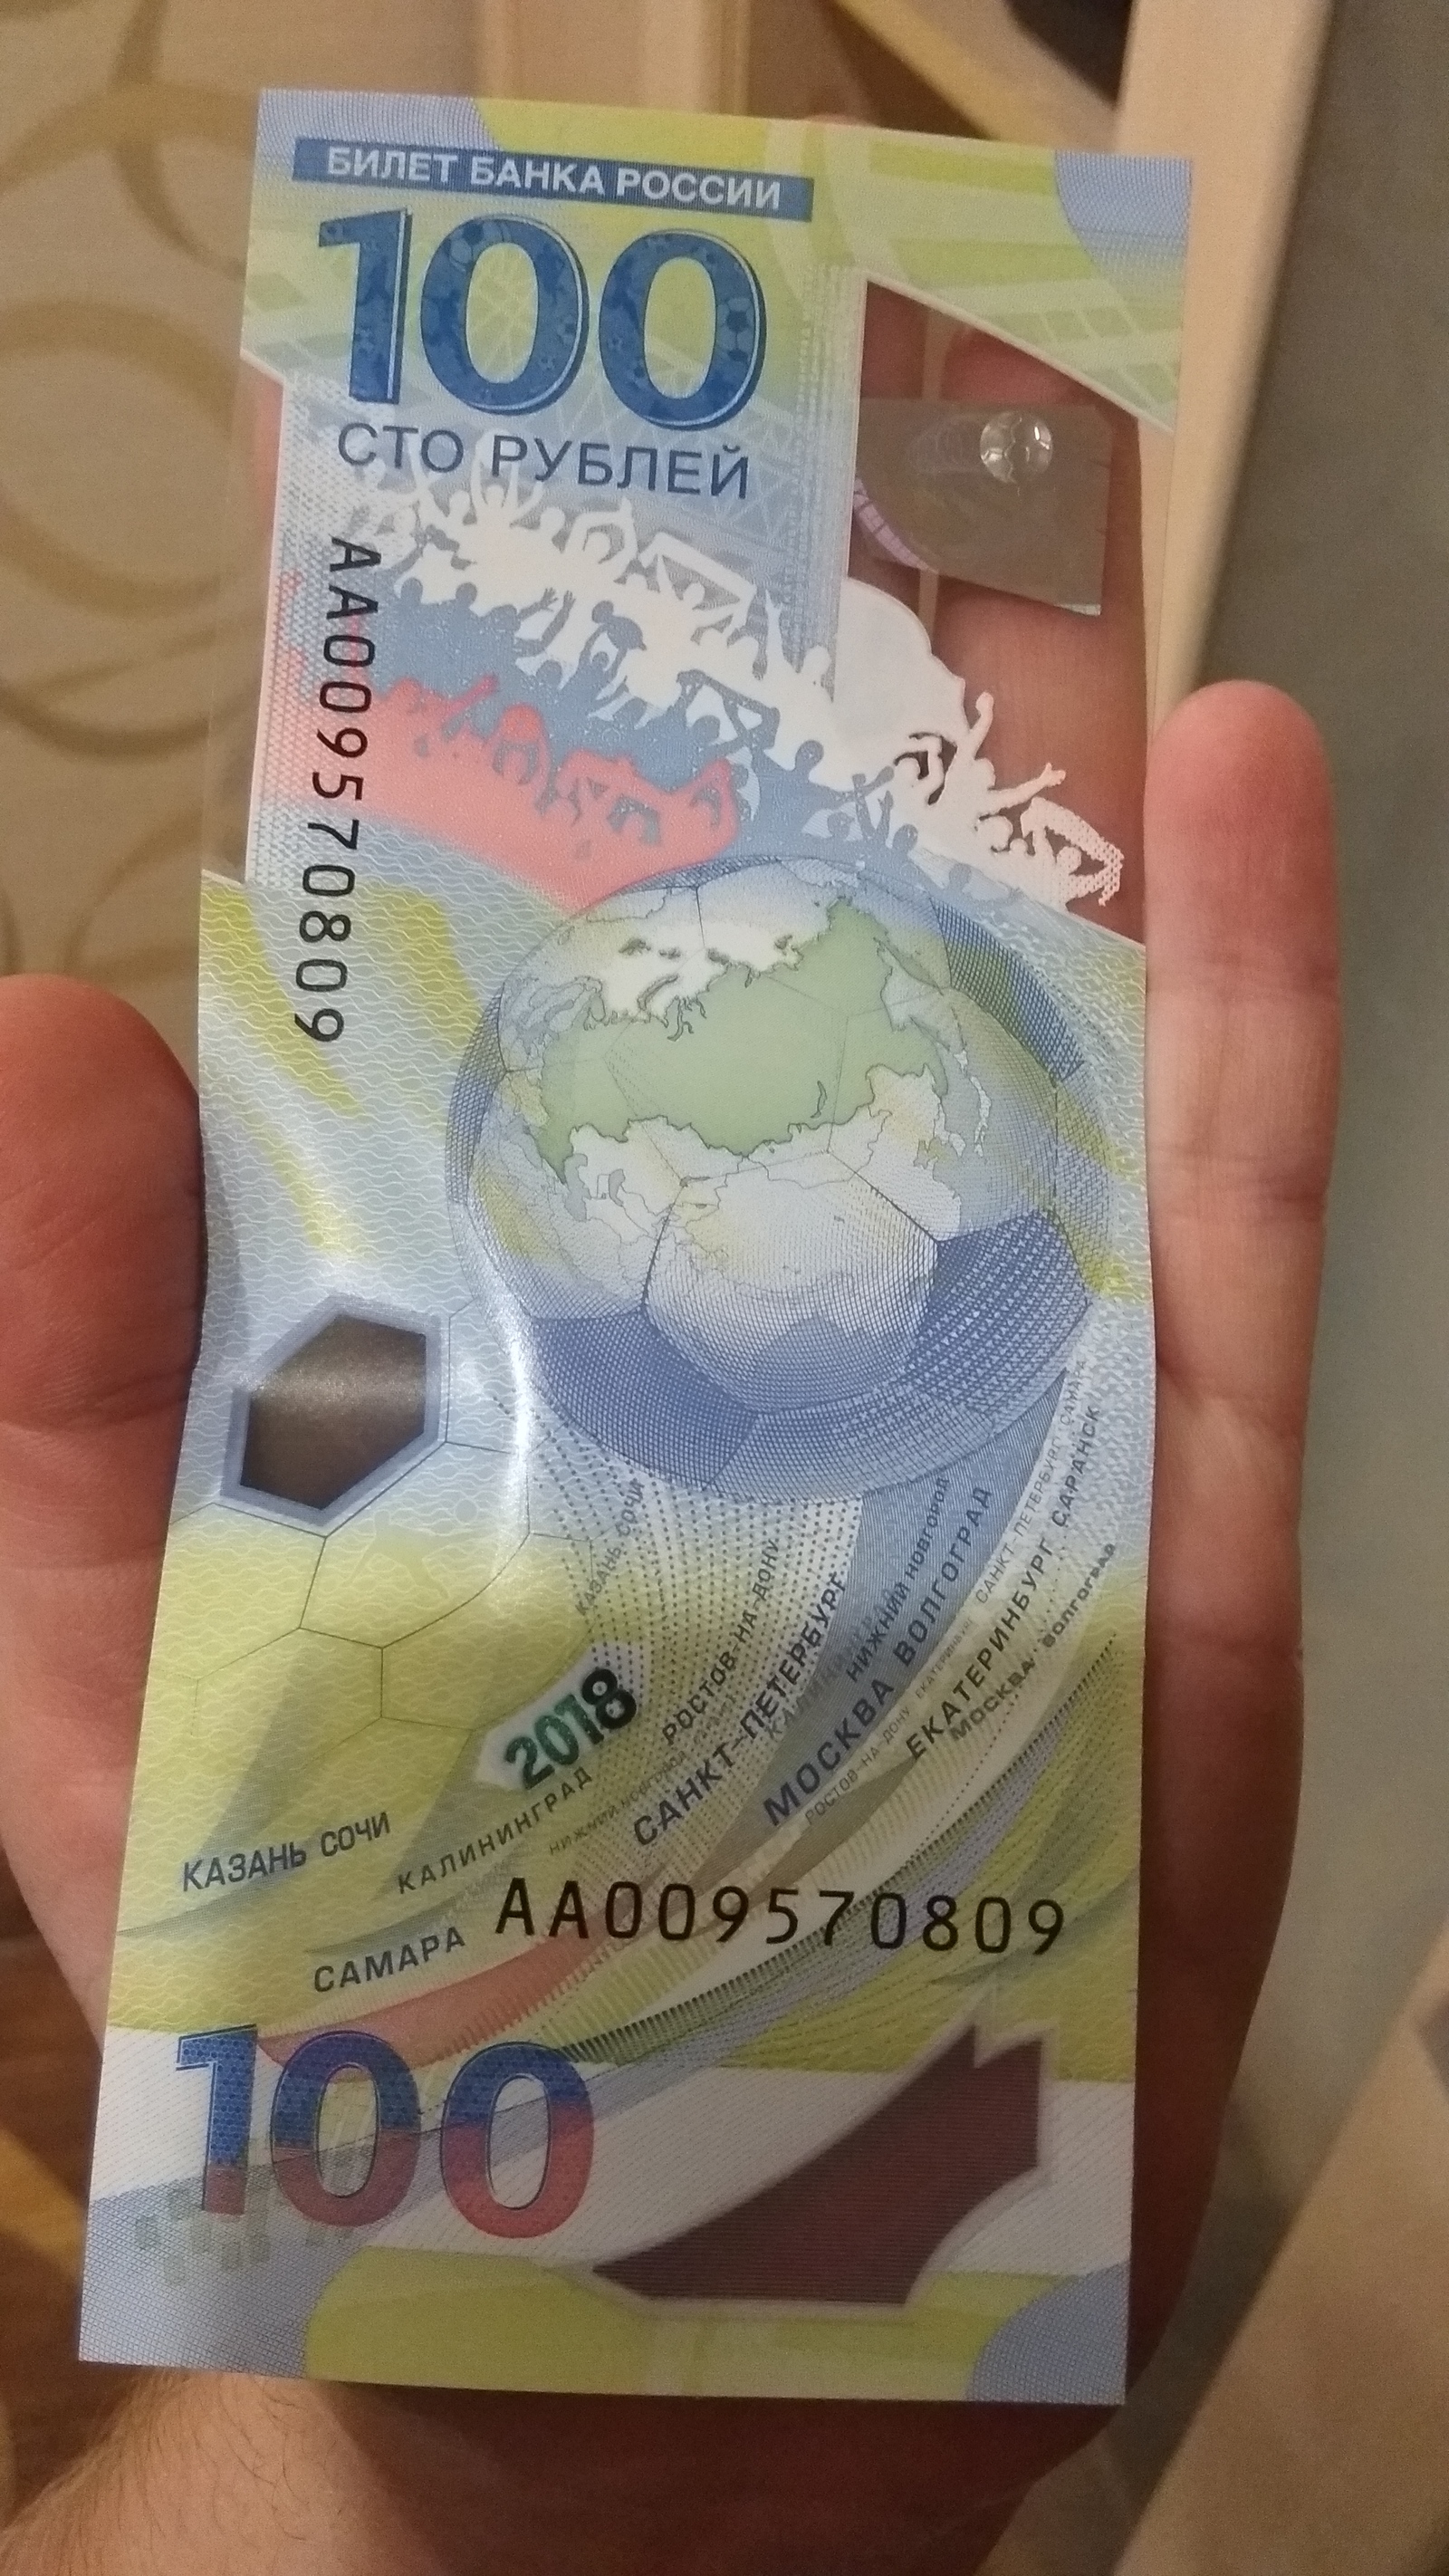 I went today with this hundred for a beer. Went in vain, the saleswoman did not accept - My, 2018 FIFA World Cup, Longpost, Kursk, Bill, Bill 100 rubles, The photo